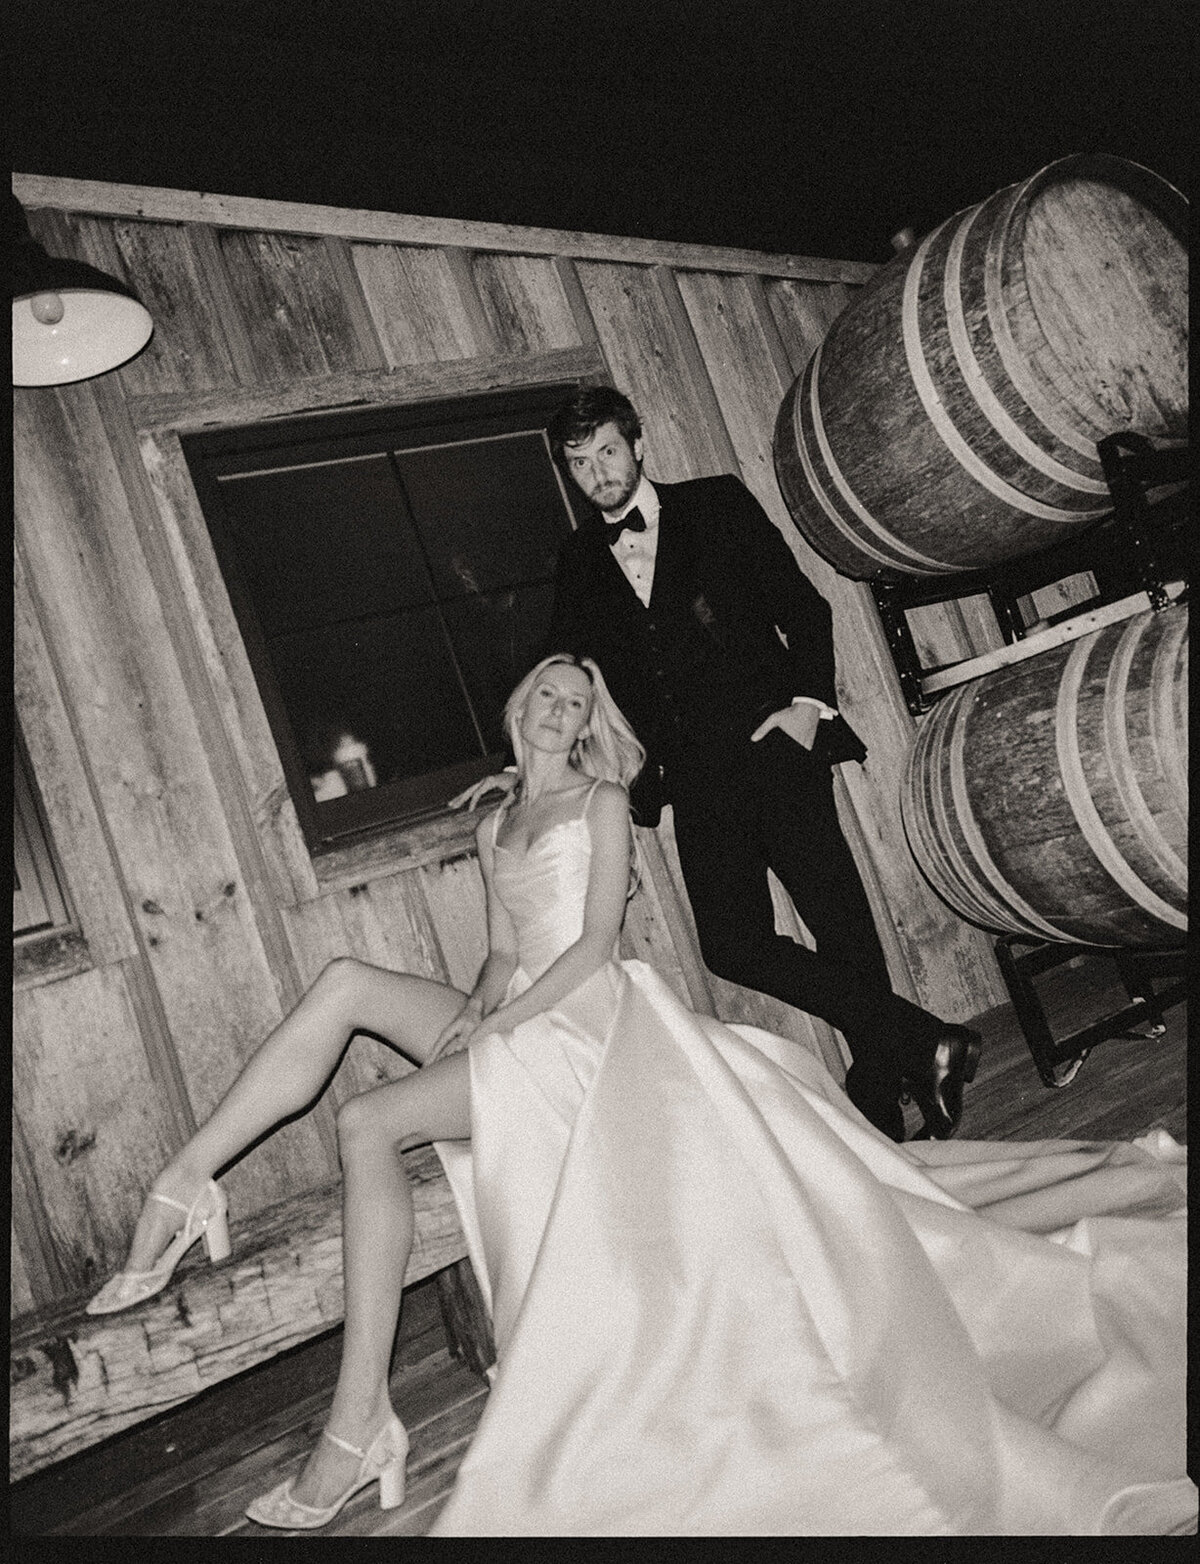 A stylish couple in formal attire, with a man standing and a woman sitting on barrels, posing dramatically in a rustic wooden room at an Iowa wedding.